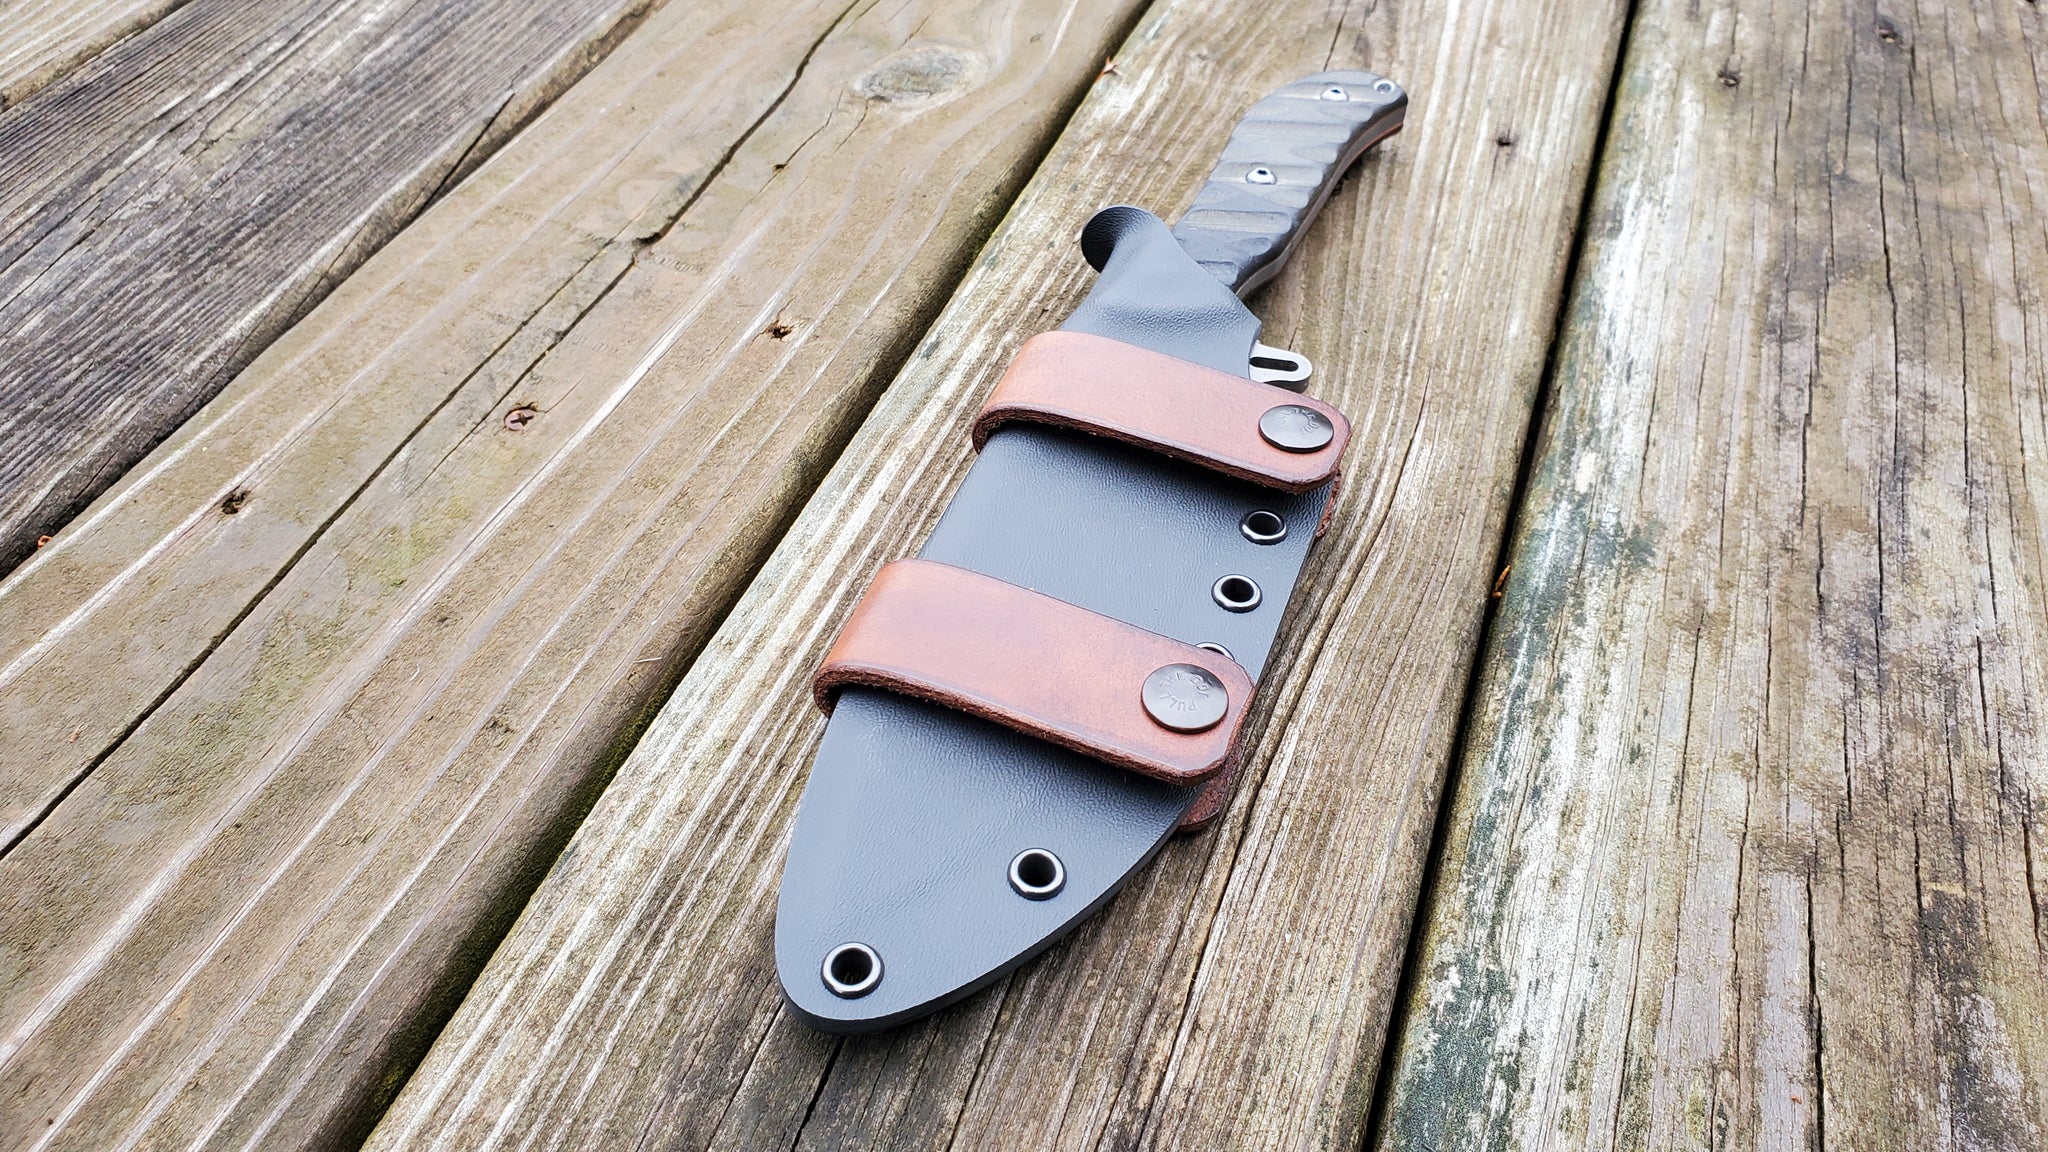 TOPS SILENT HERO custom Taco kydex sheath w/ Leather Scout Straps